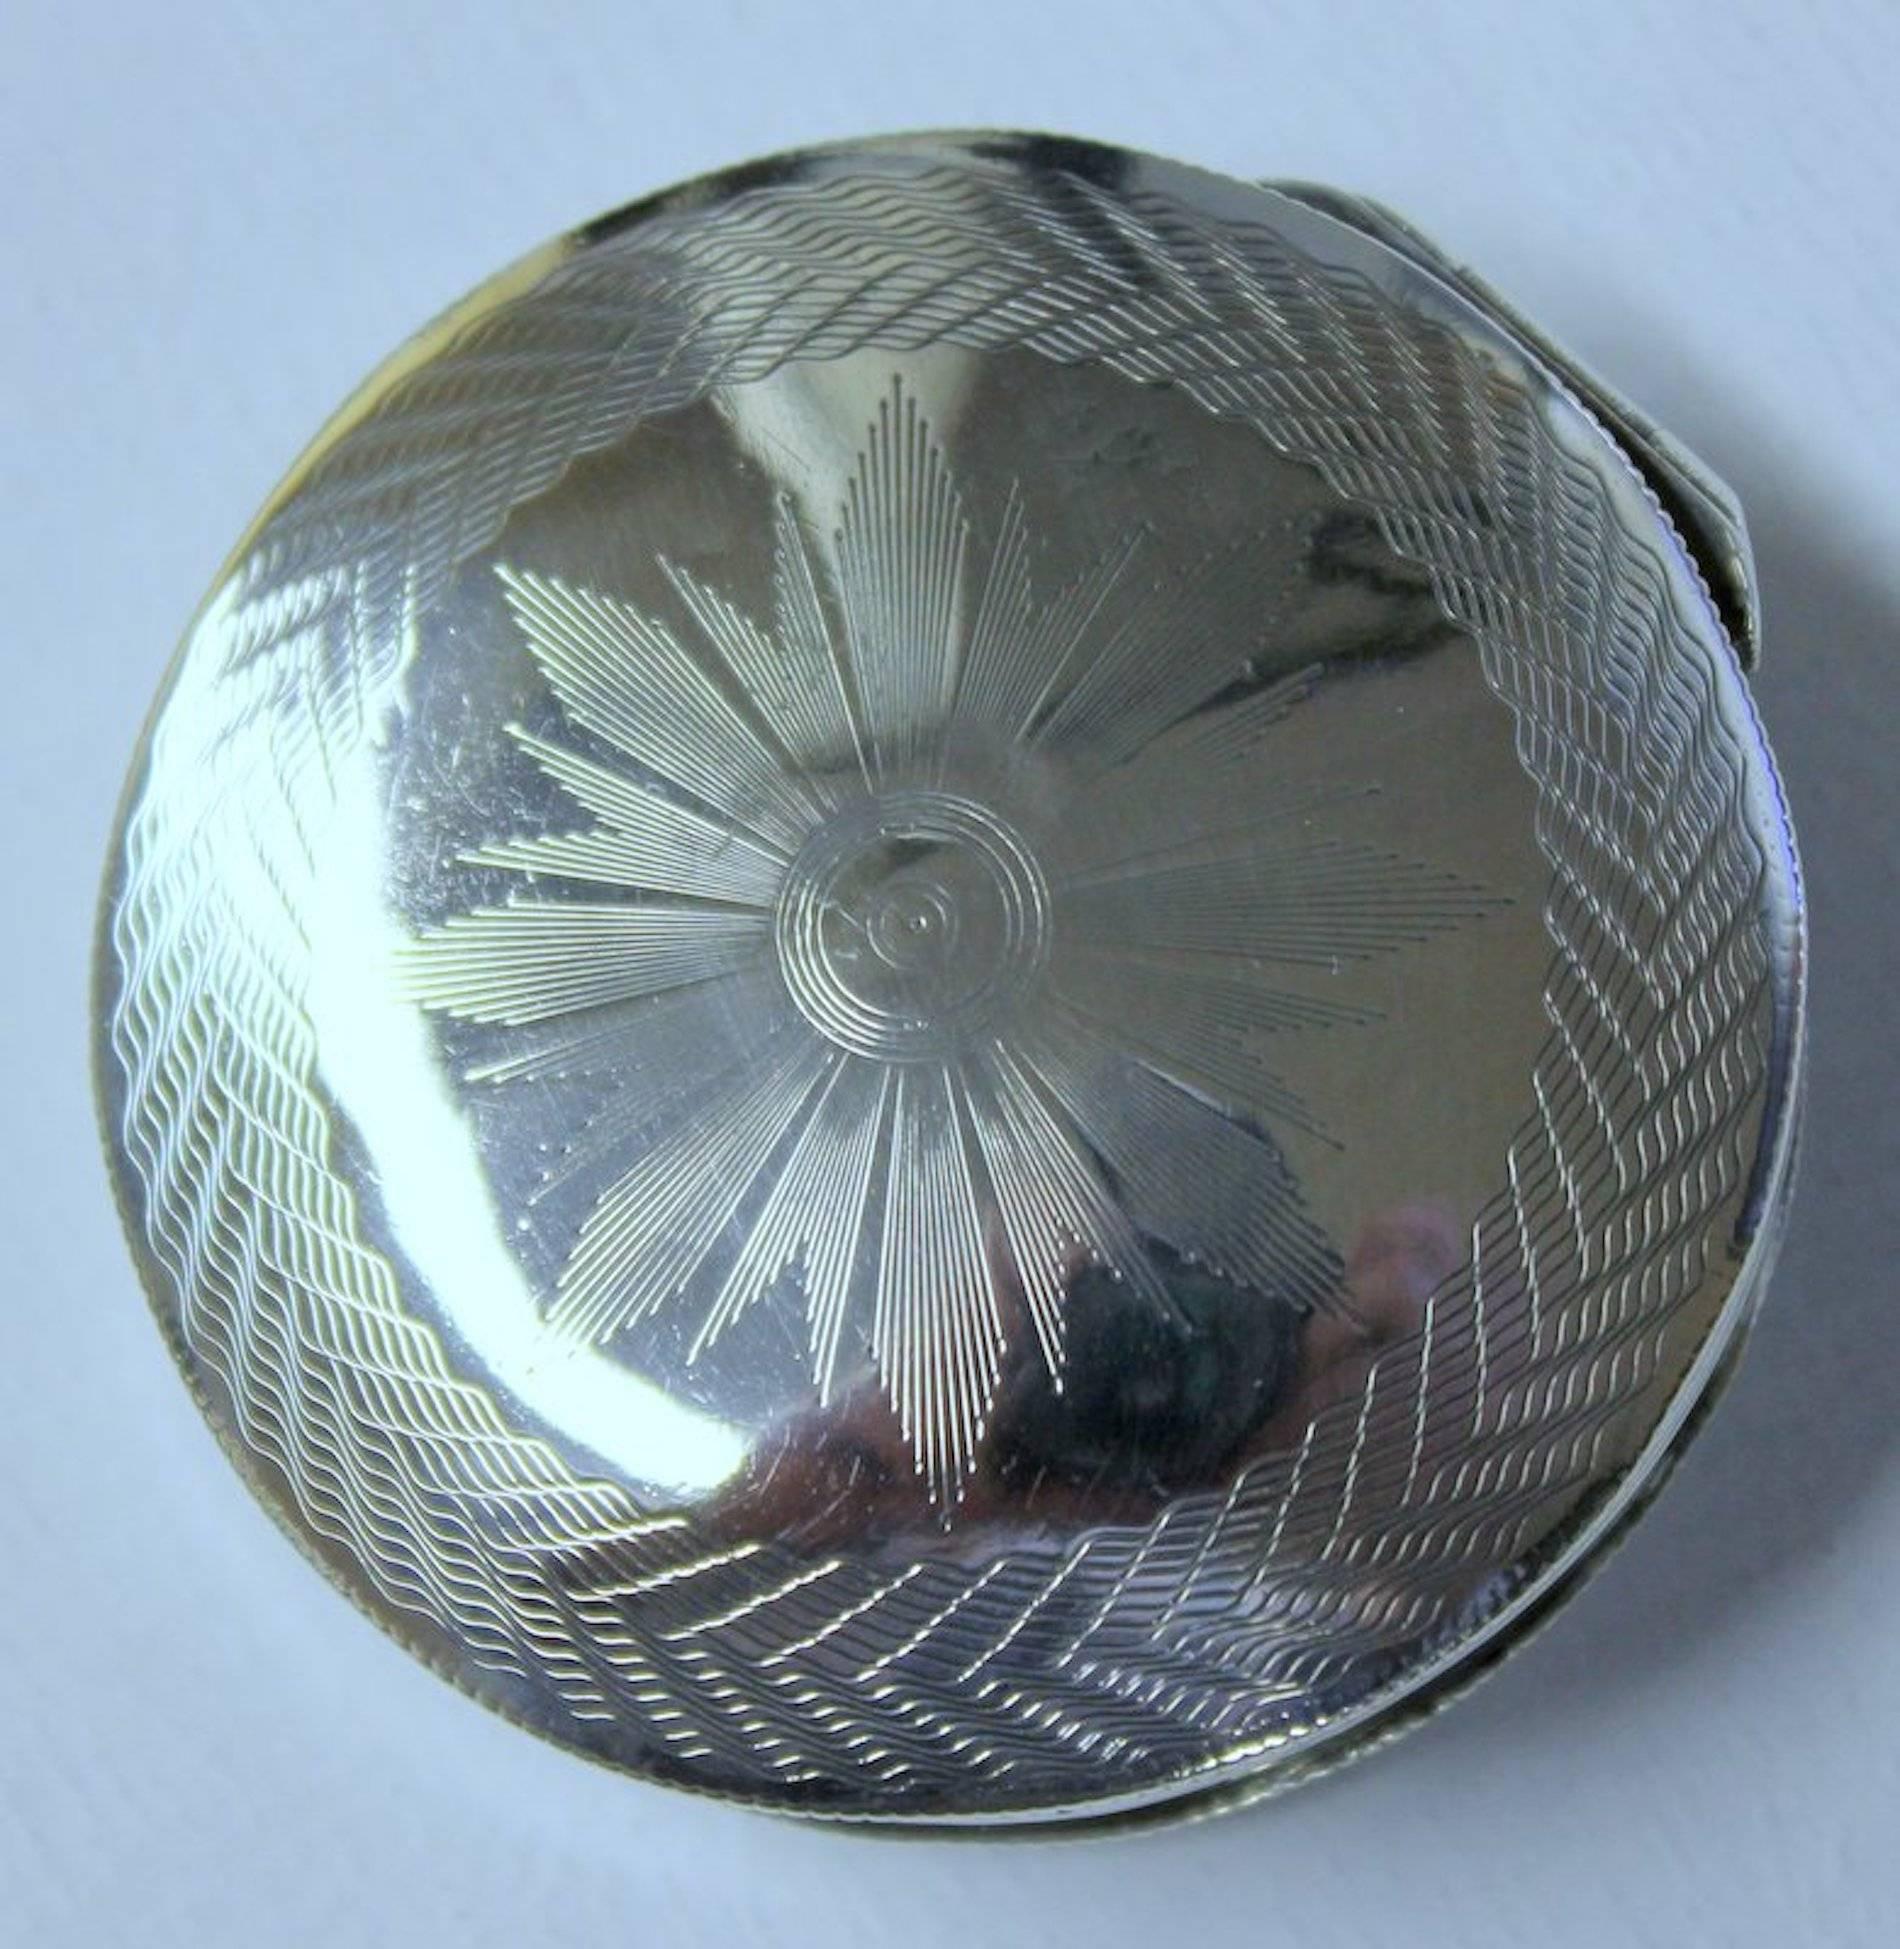 Antique Dutch hand engraved 833 fine silver round snuff box
Please note hand engraved design top and bottom. Tax, assay and date marks on edge of lip and inside base. Date mark for 1836.